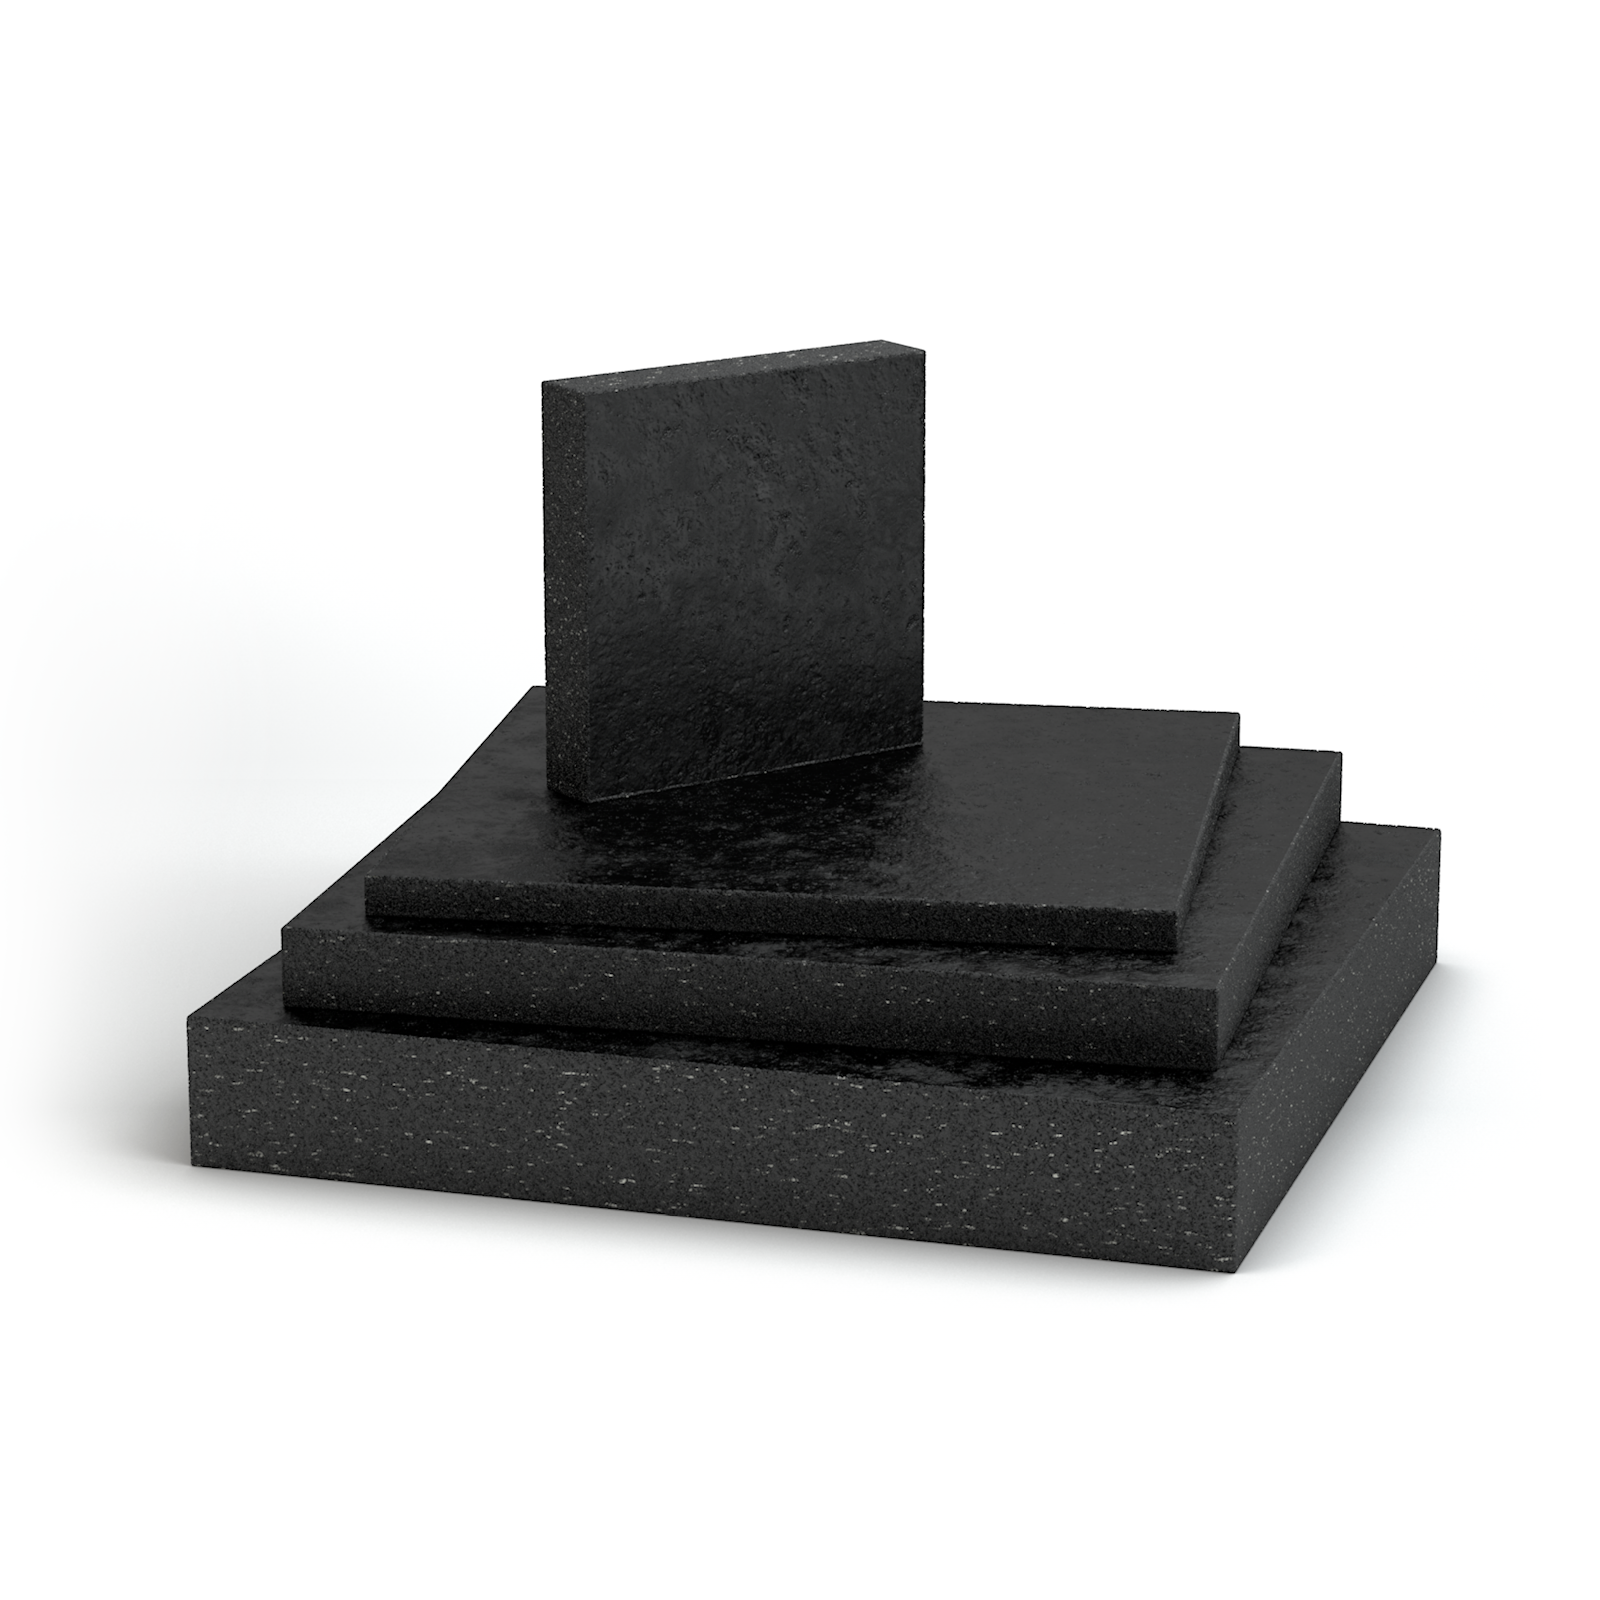 SA-47 masticated rubber bearing pads used random oriented fibers (ROF) to provide enhanced compressive strength when compared to unreinforced materials.